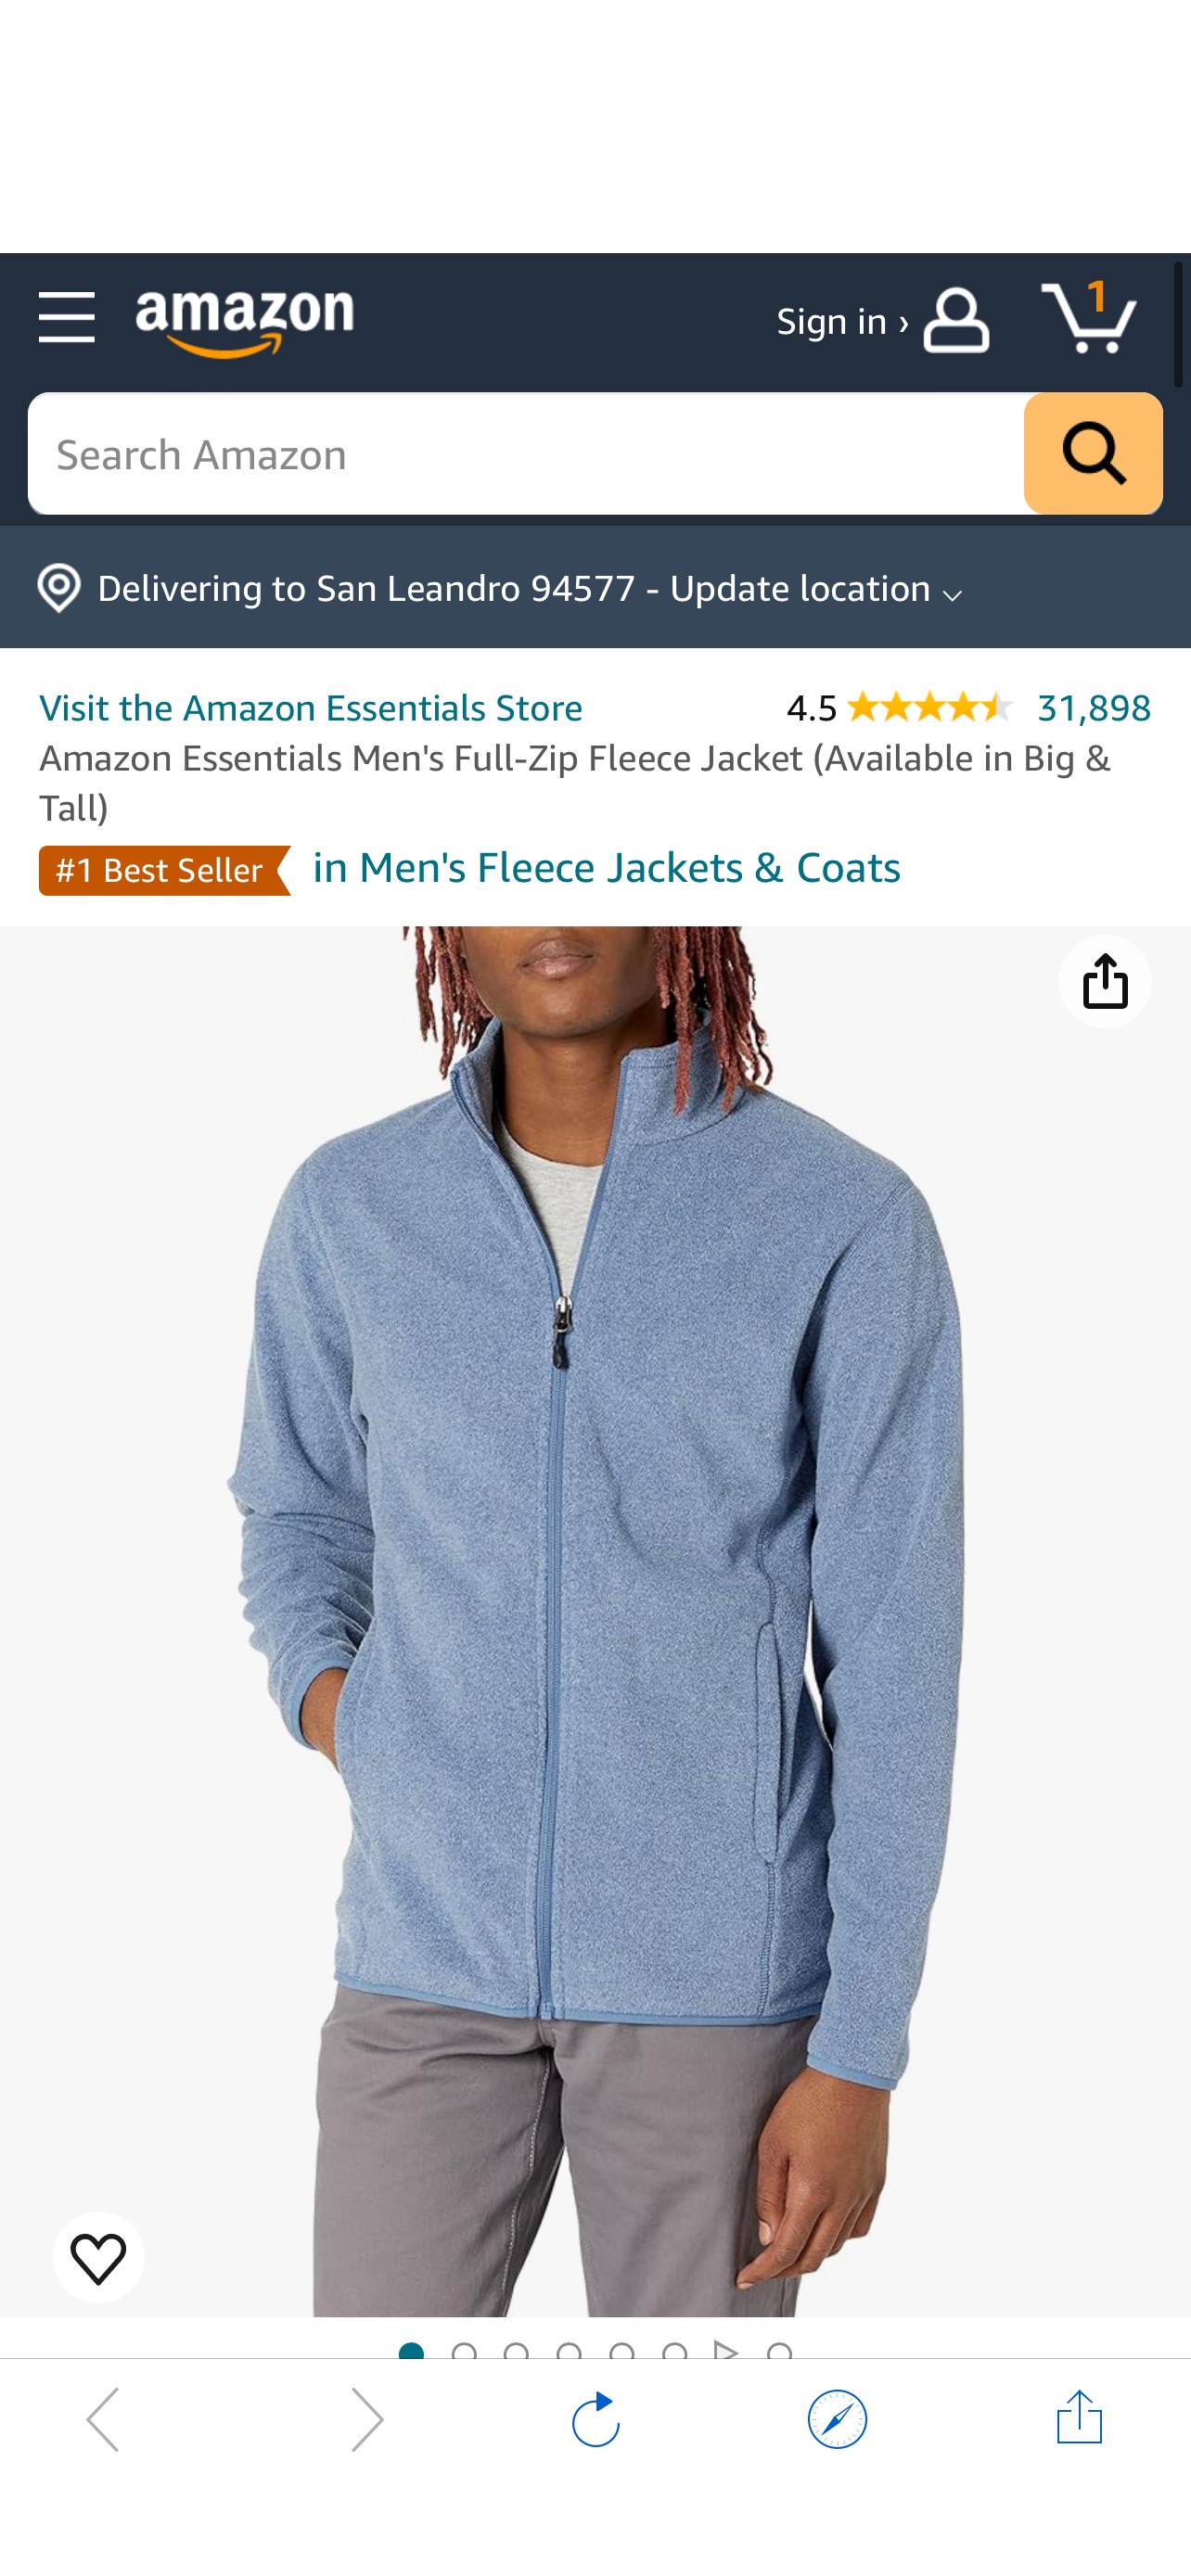 Amazon.com: Amazon Essentials Men's Full-Zip Fleece Jacket (Available in Big & Tall), Blue Heather, Large : Clothing, Shoes & Jewelry